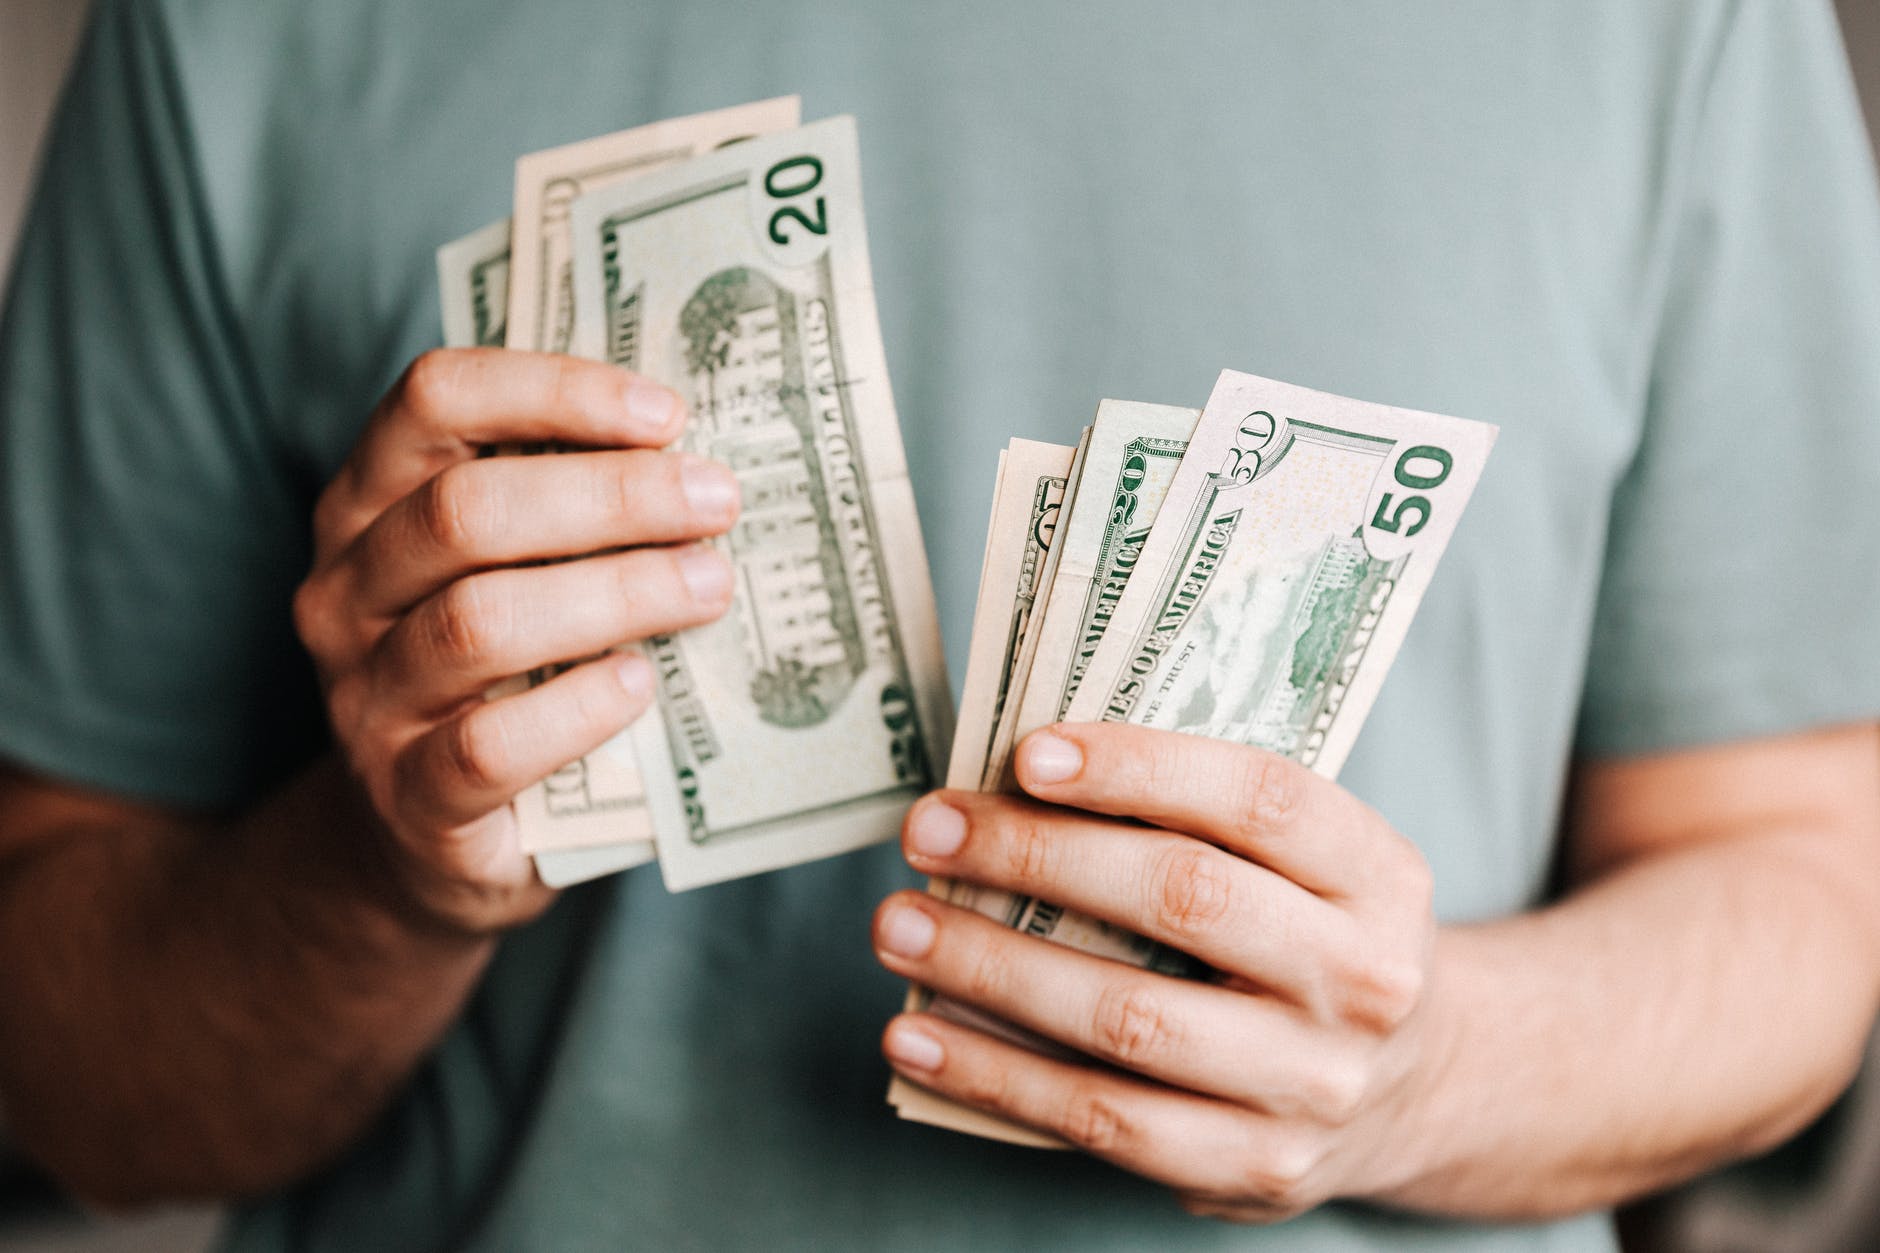 Is it easy to get a payday loan? Source: Pexels.